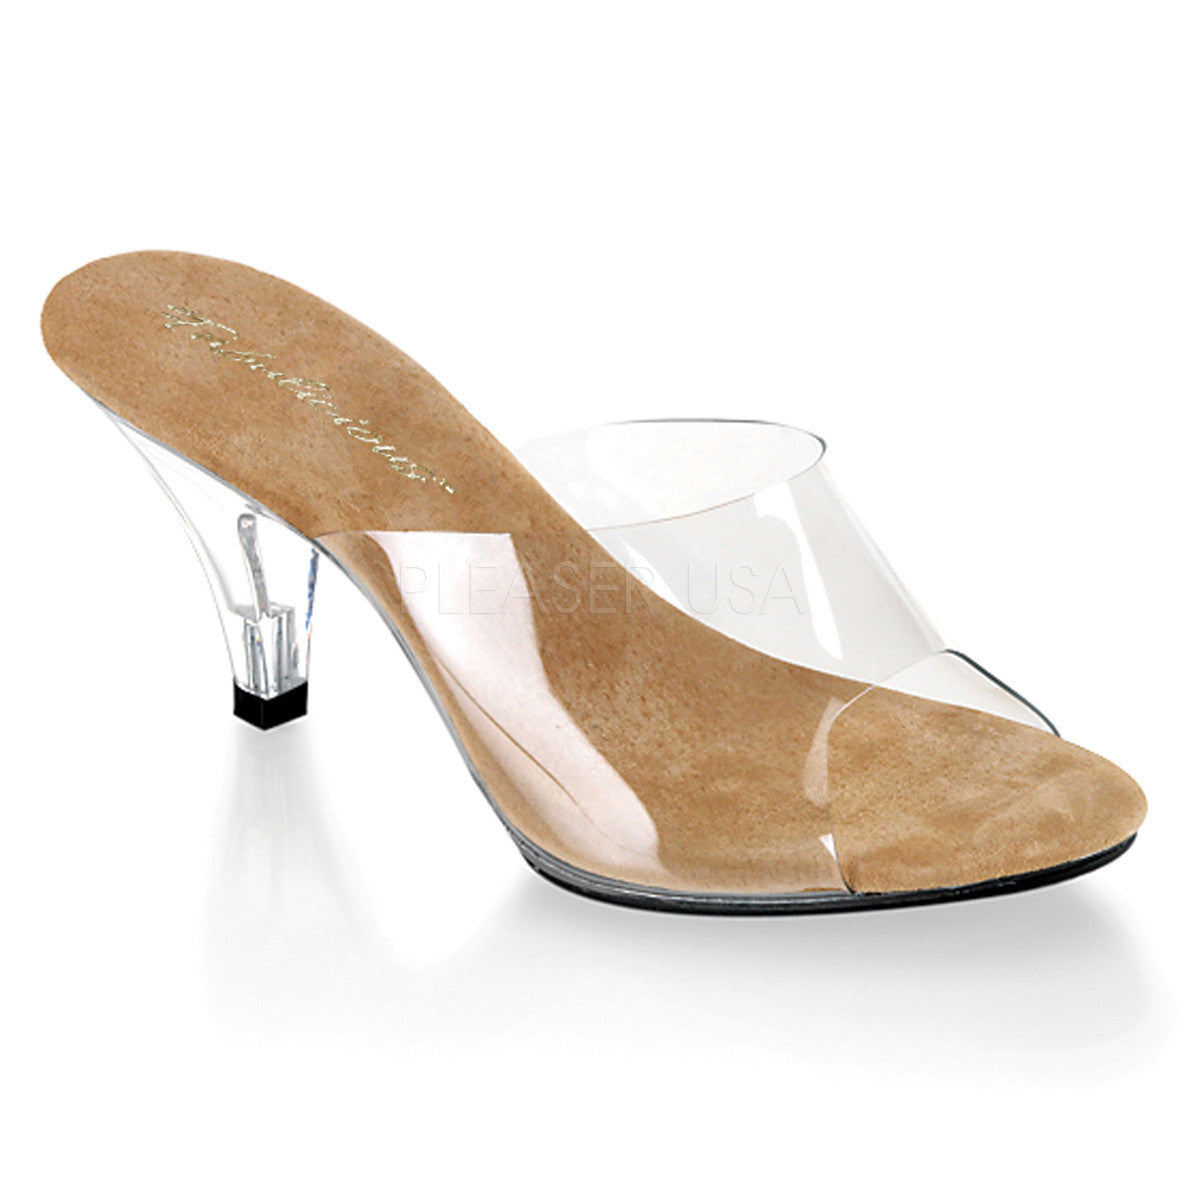 Fabulicious,Fabulicious BELLE-301 Clear-Tan Sandals - Shoecup.com